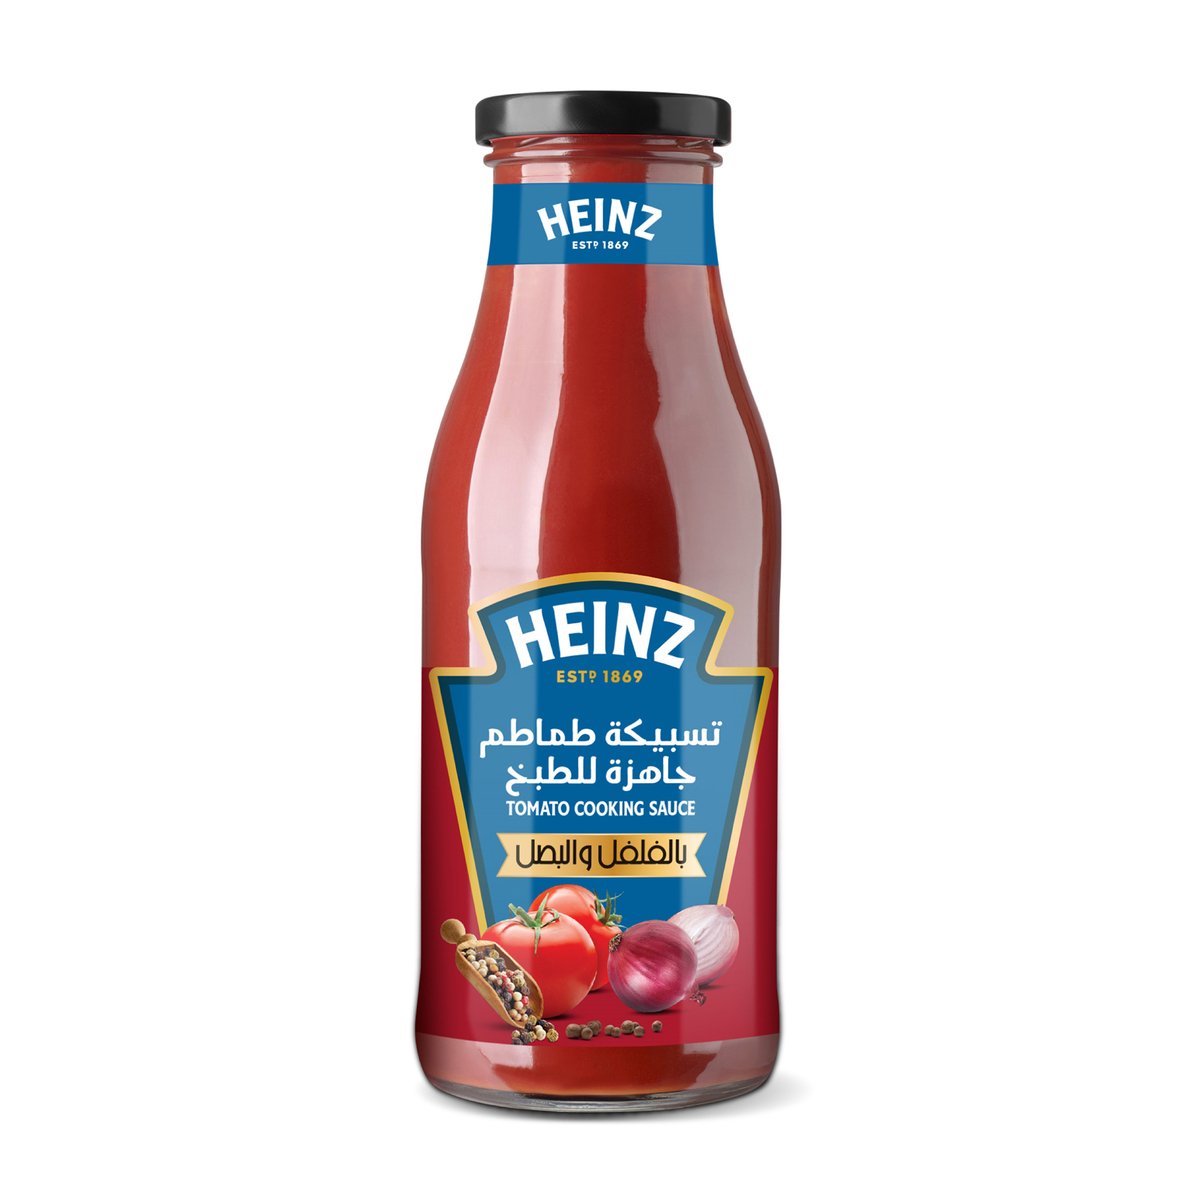 Heinz Tasbeeka Tomato Cooking Sauce with Onion and Black Pepper 500 ml